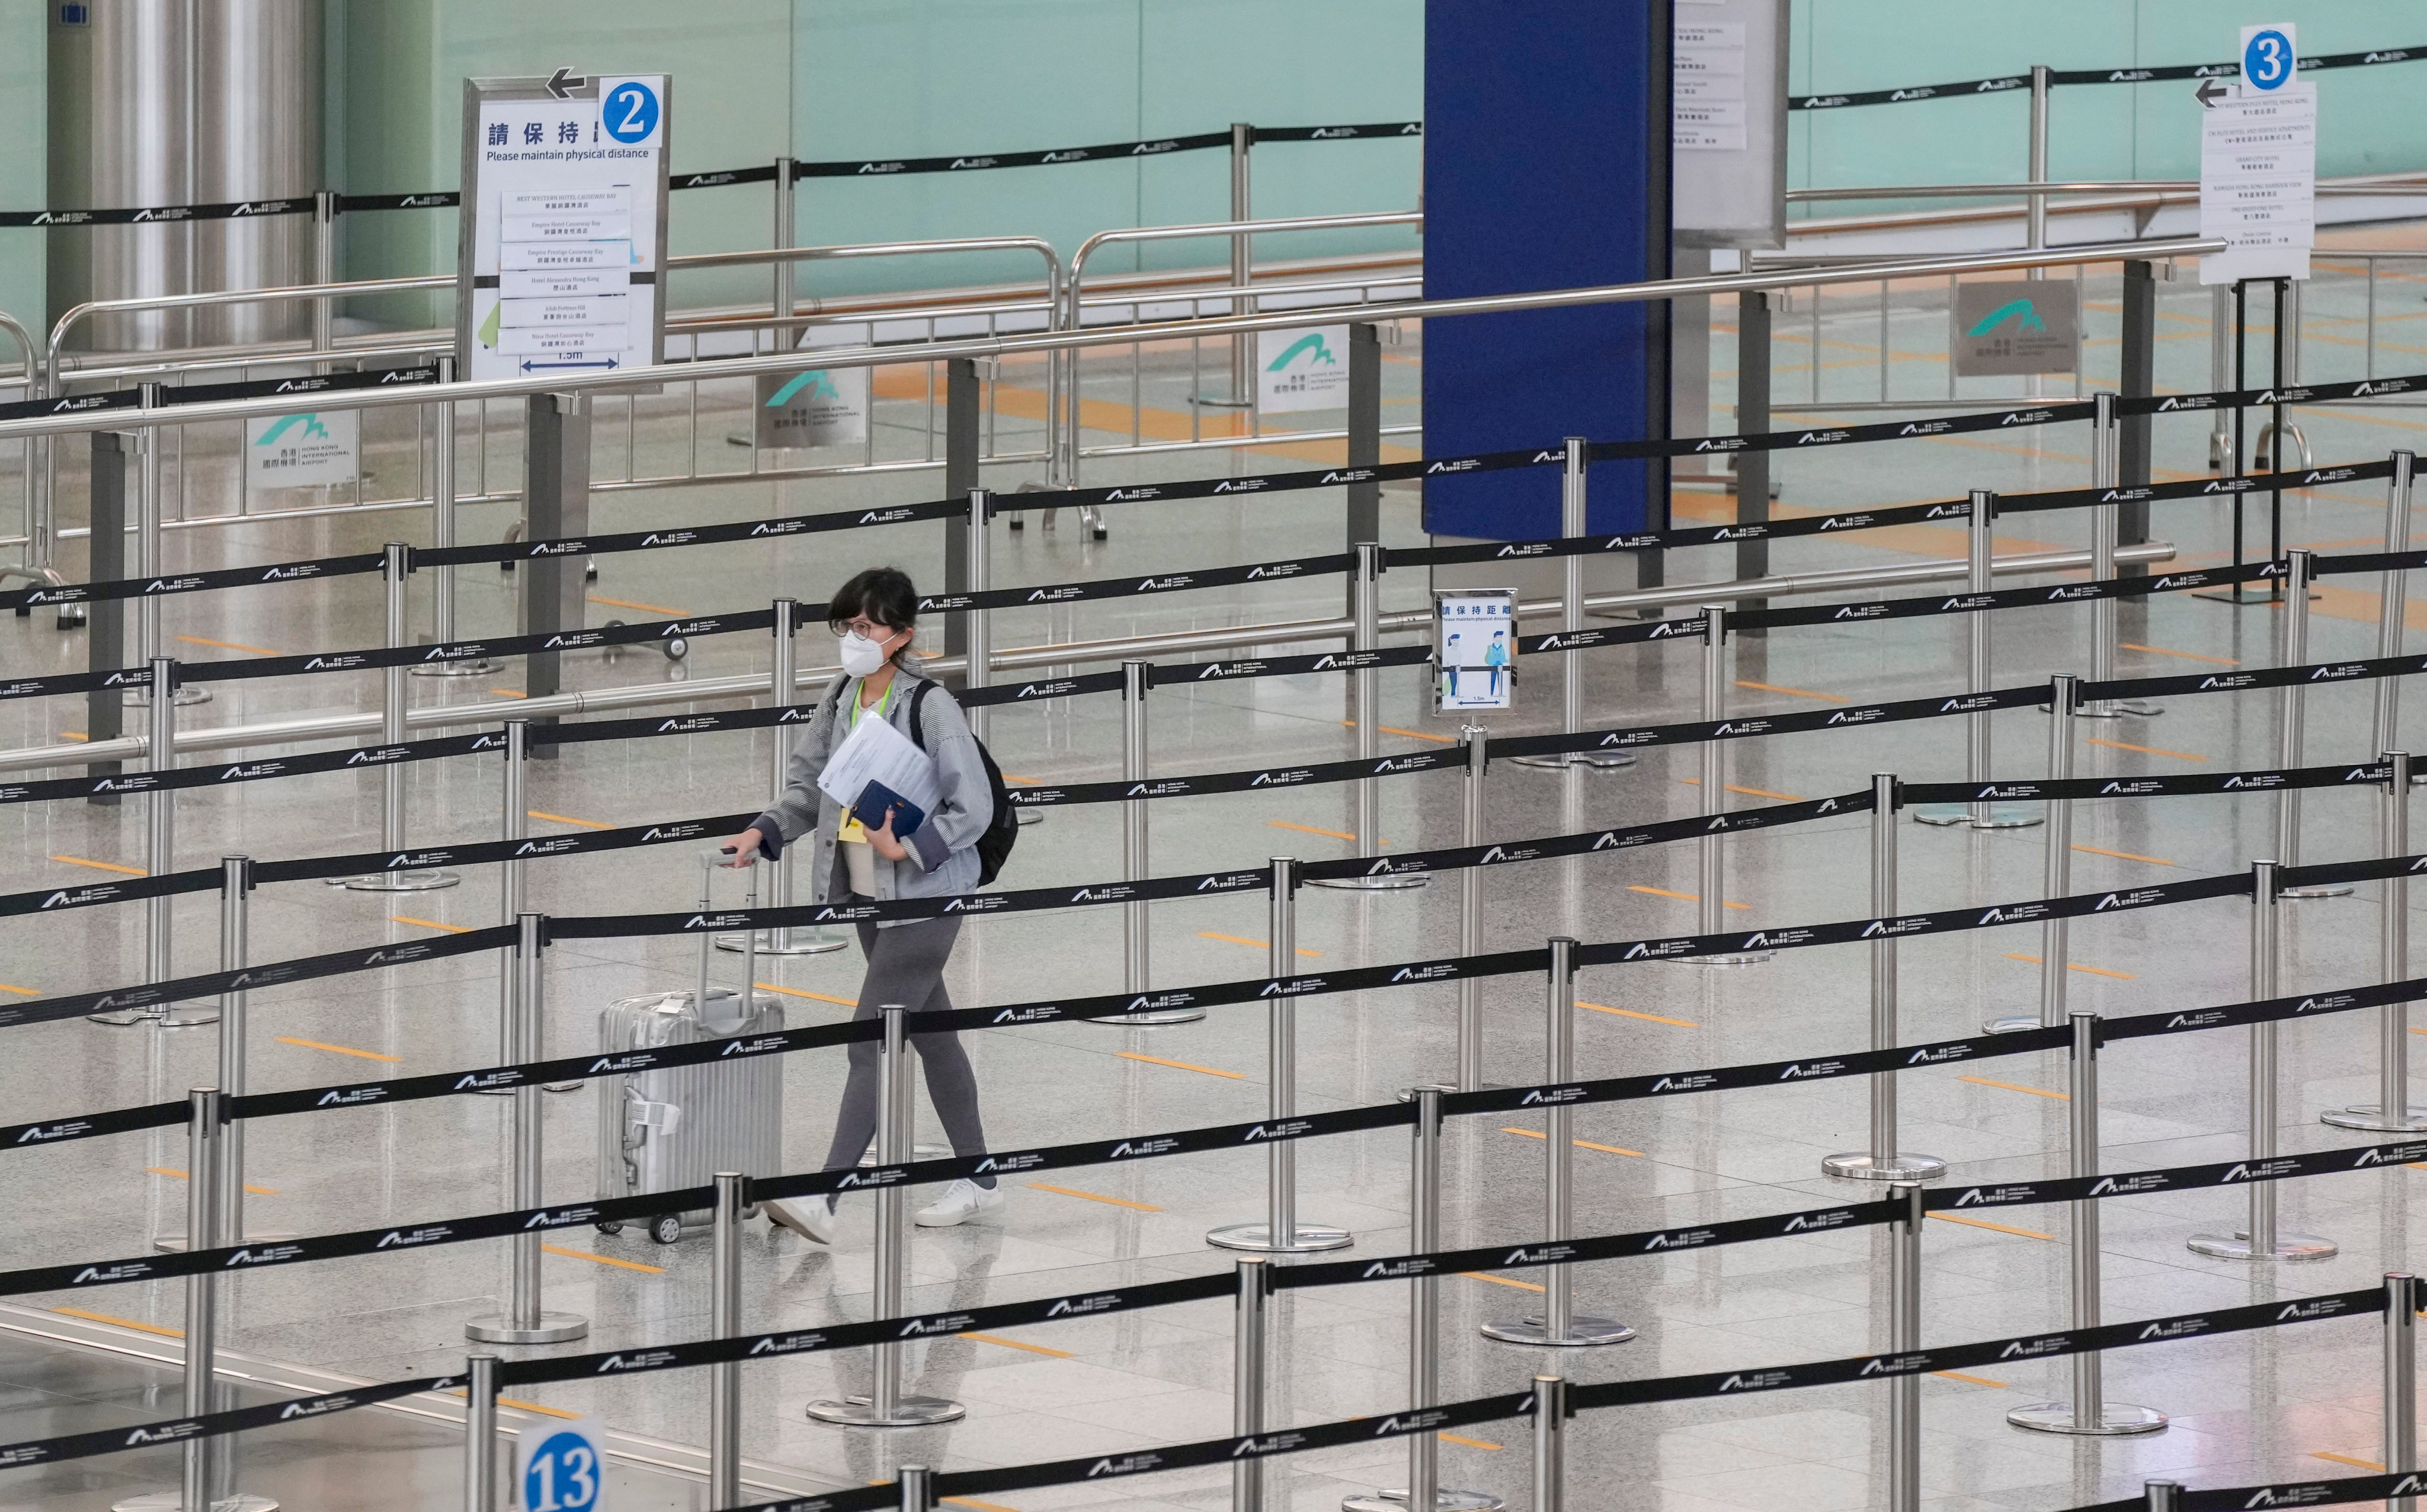 A lone traveller is seen at Hong Kong International Airport on July 7, 2022. The city’s travel restrictions have reduced the number of overseas visitors by 90 per cent since the start of the pandemic two years ago. Photo: Sam Tsang